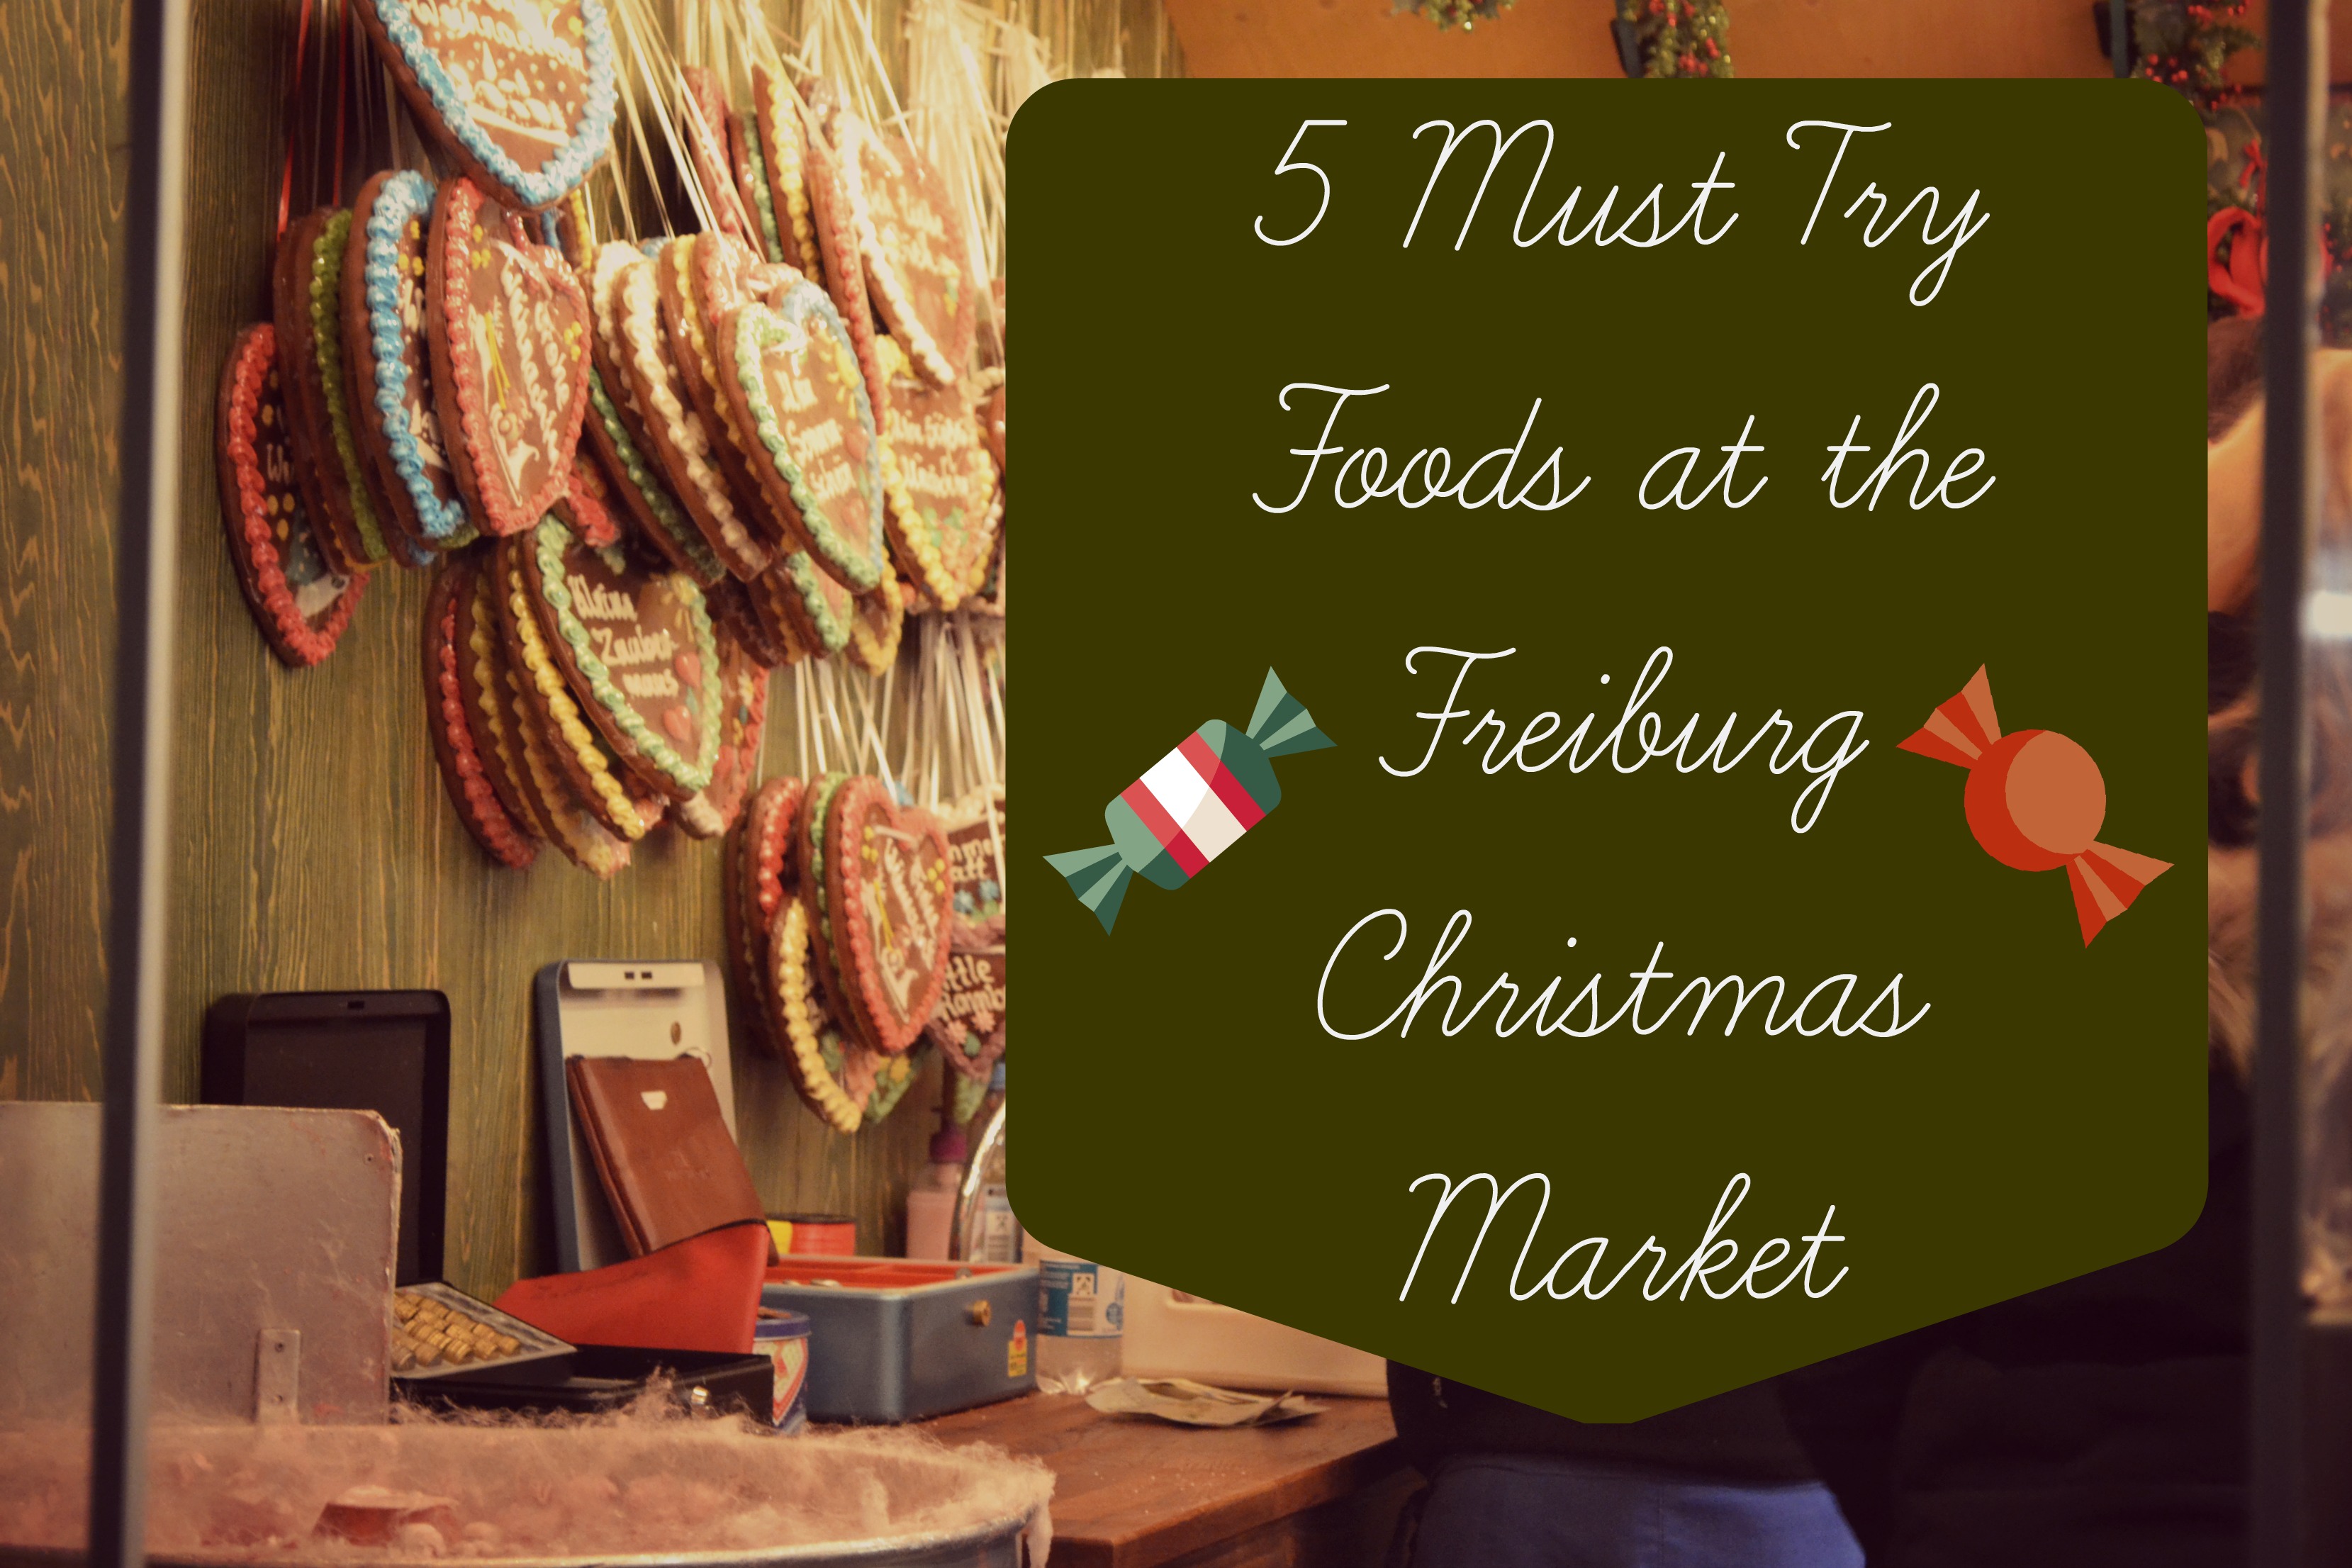 4 Must Try Foods at the Freiburg Christmas Market